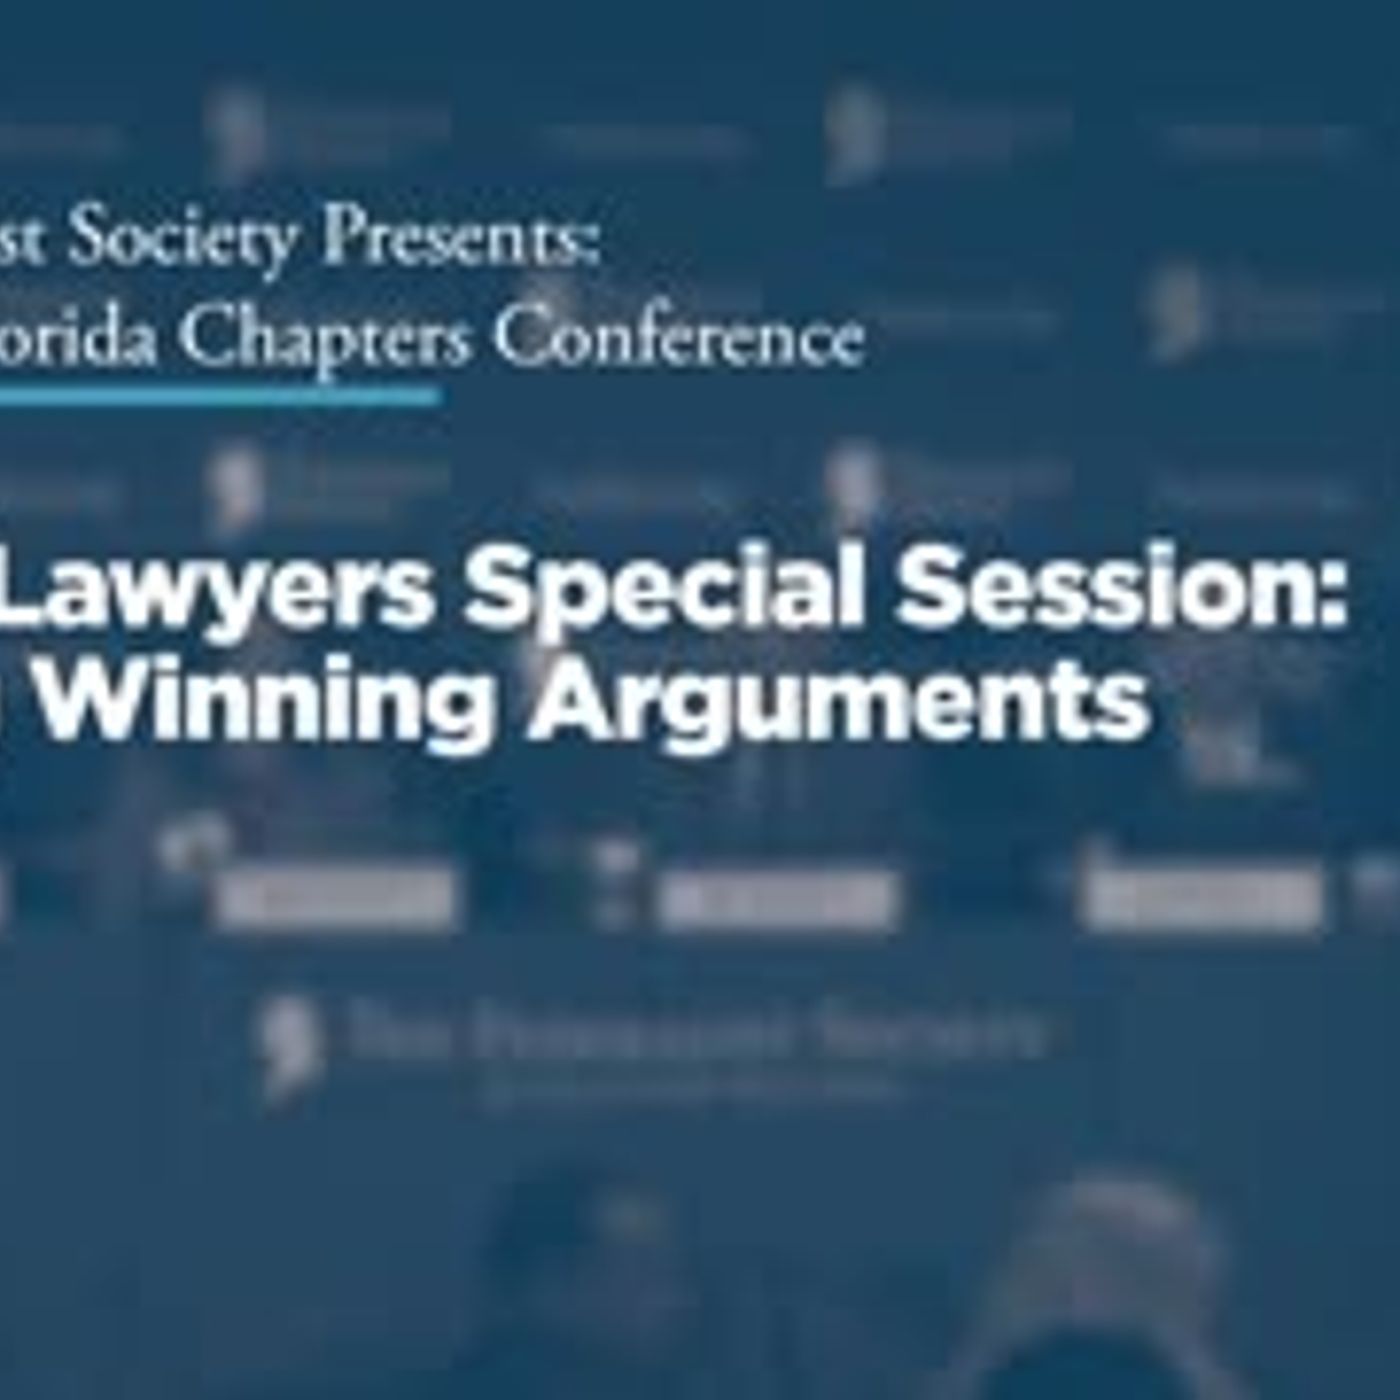 Young Lawyers Special Session: Making Winning Arguments